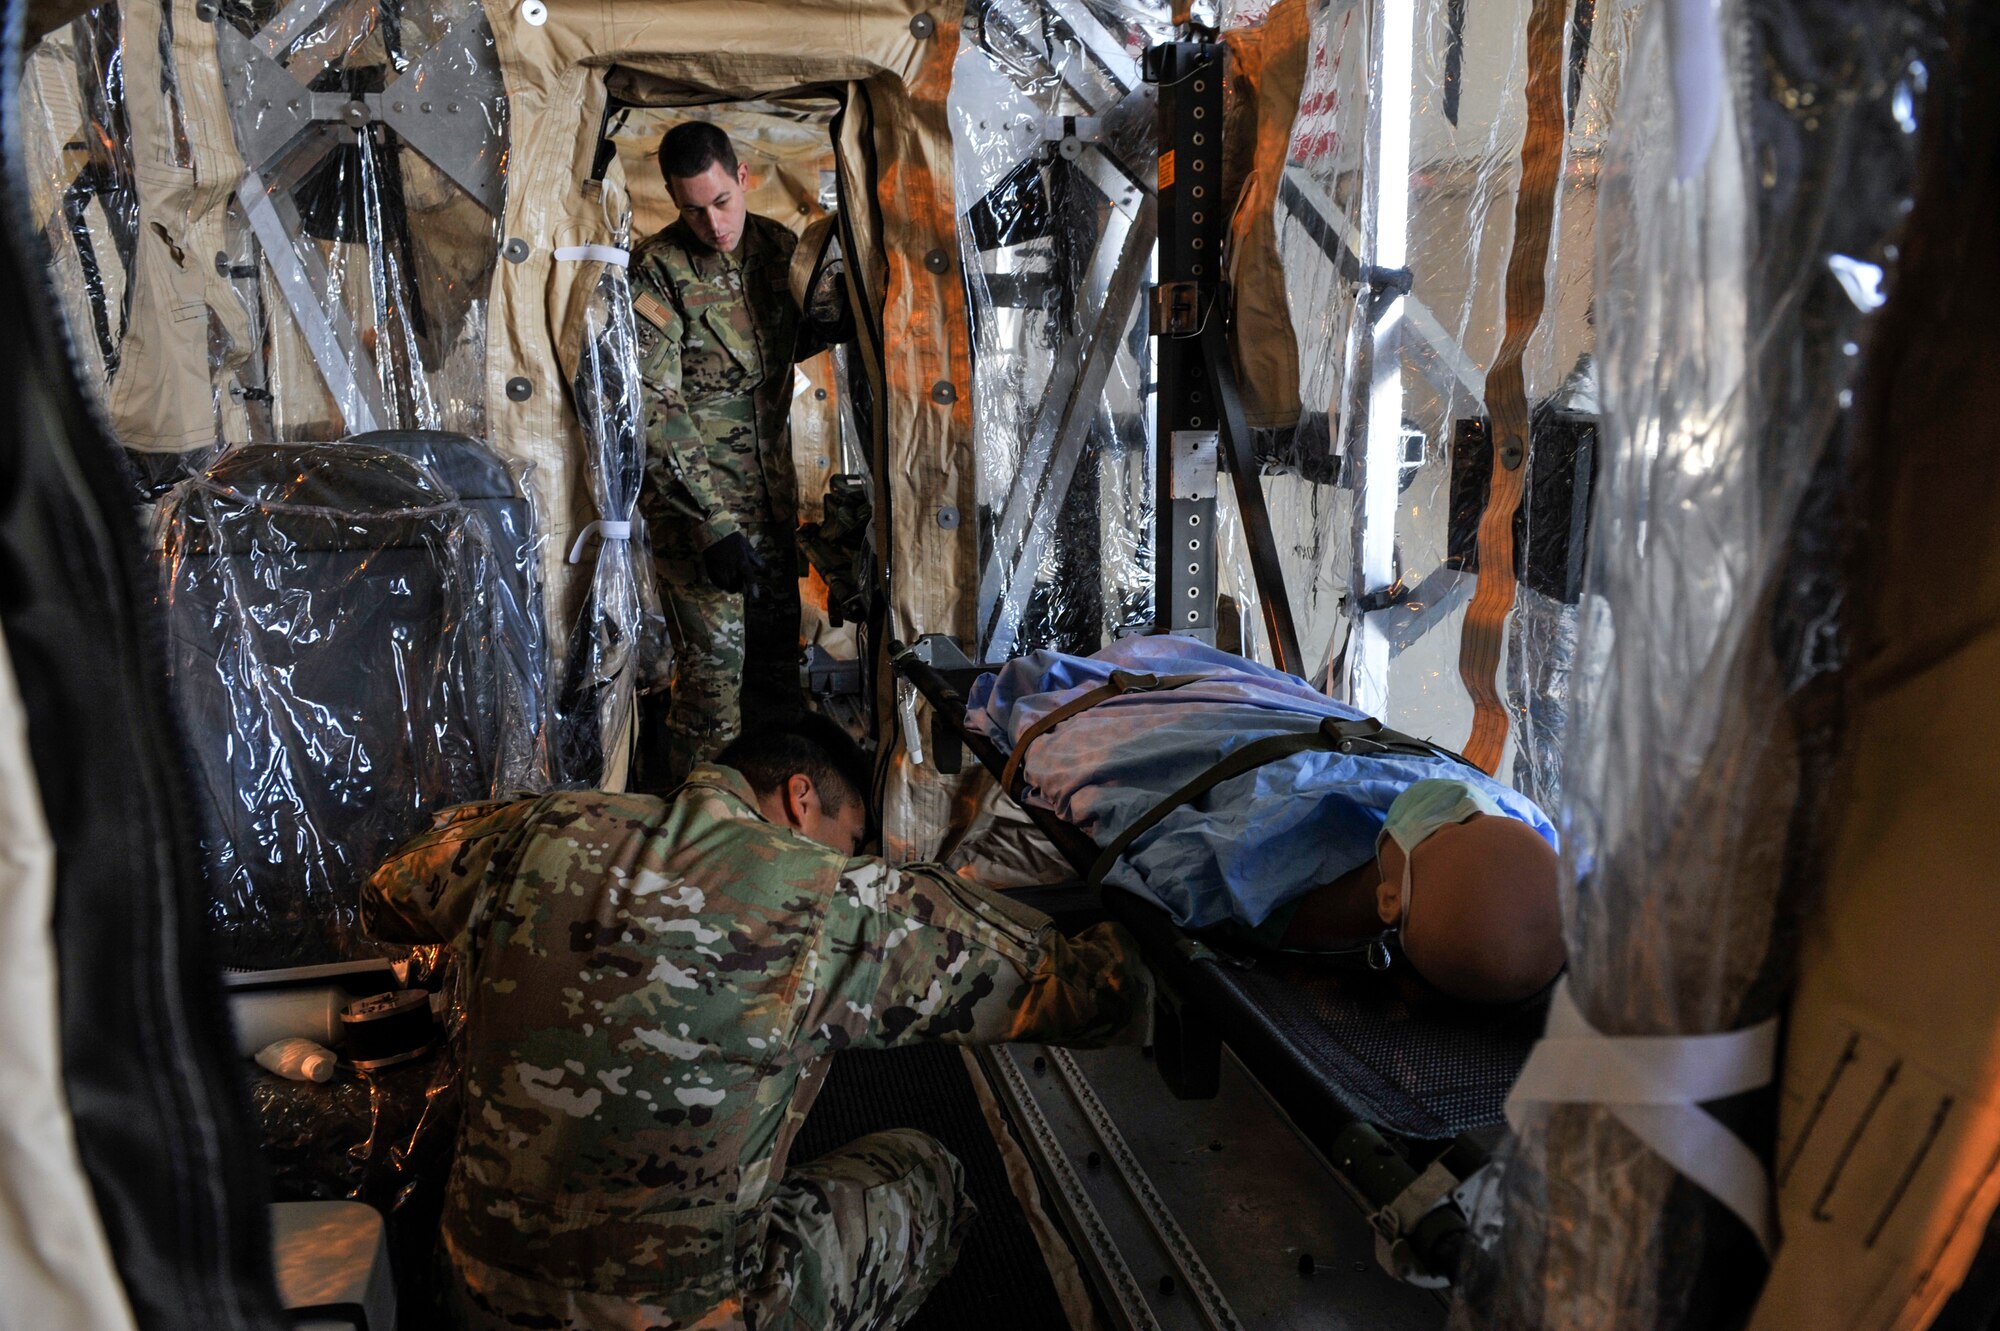 Airmen participating in Transport Isolation System training prepare a mock patient for a training scenario at Joint Base Charleston, S.C., April 4, 2020.